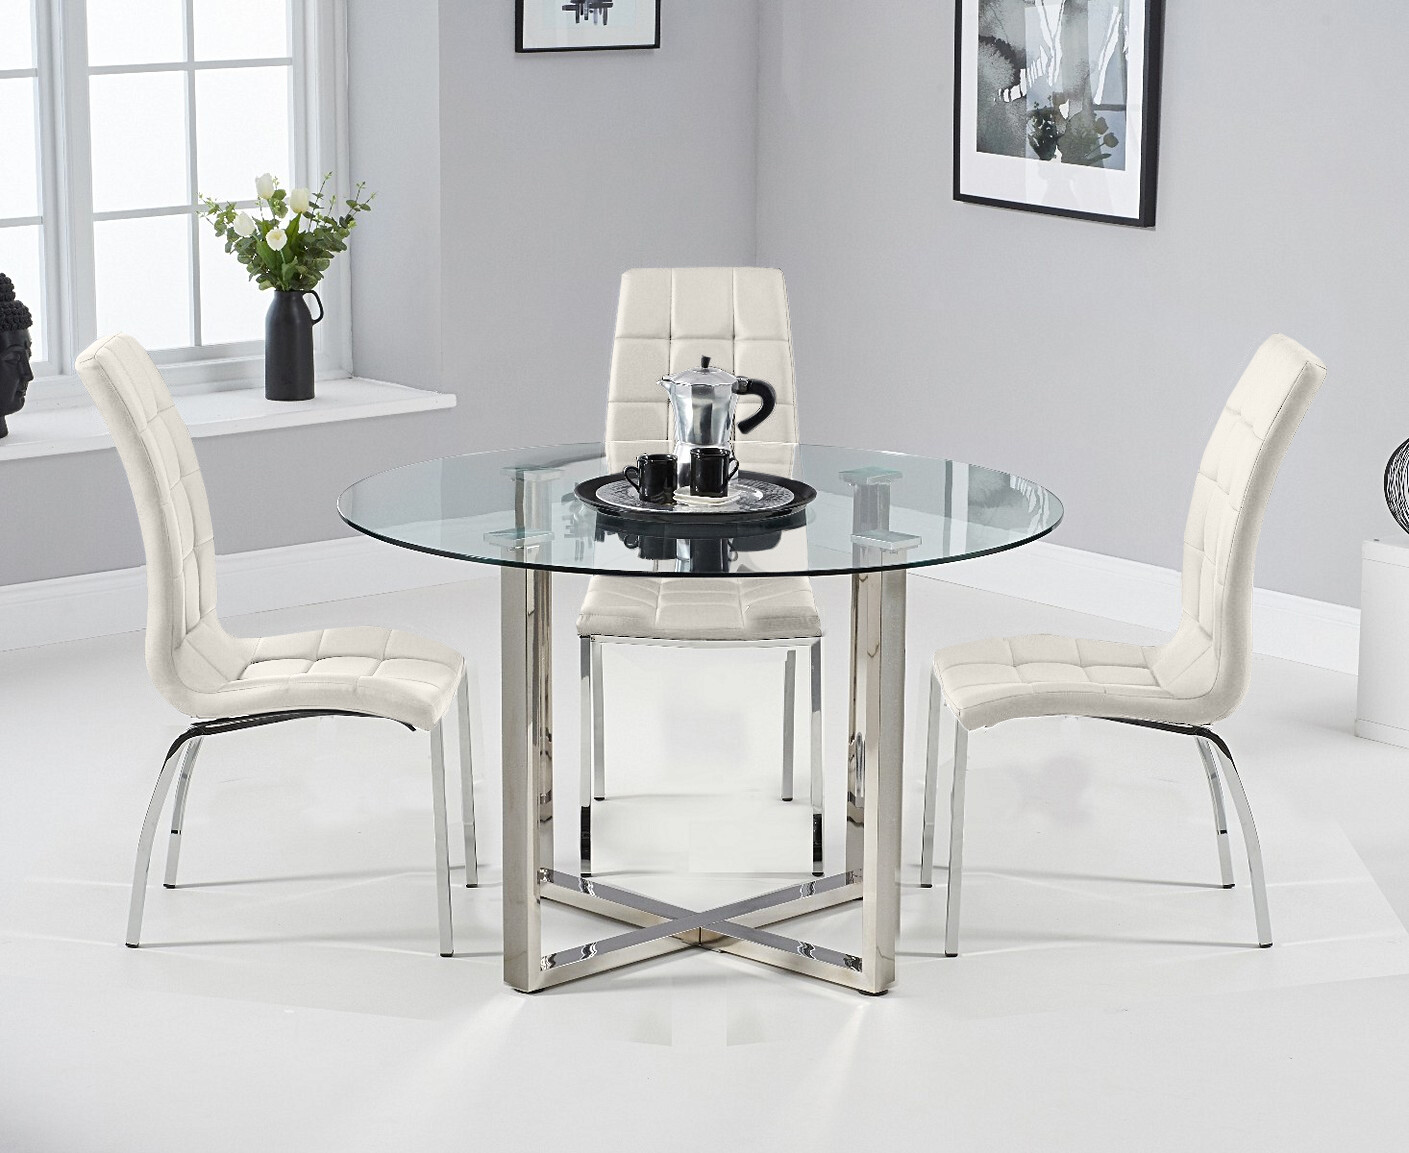 Photo 3 of Vaso 120cm round glass dining table with 4 cream enzo chairs